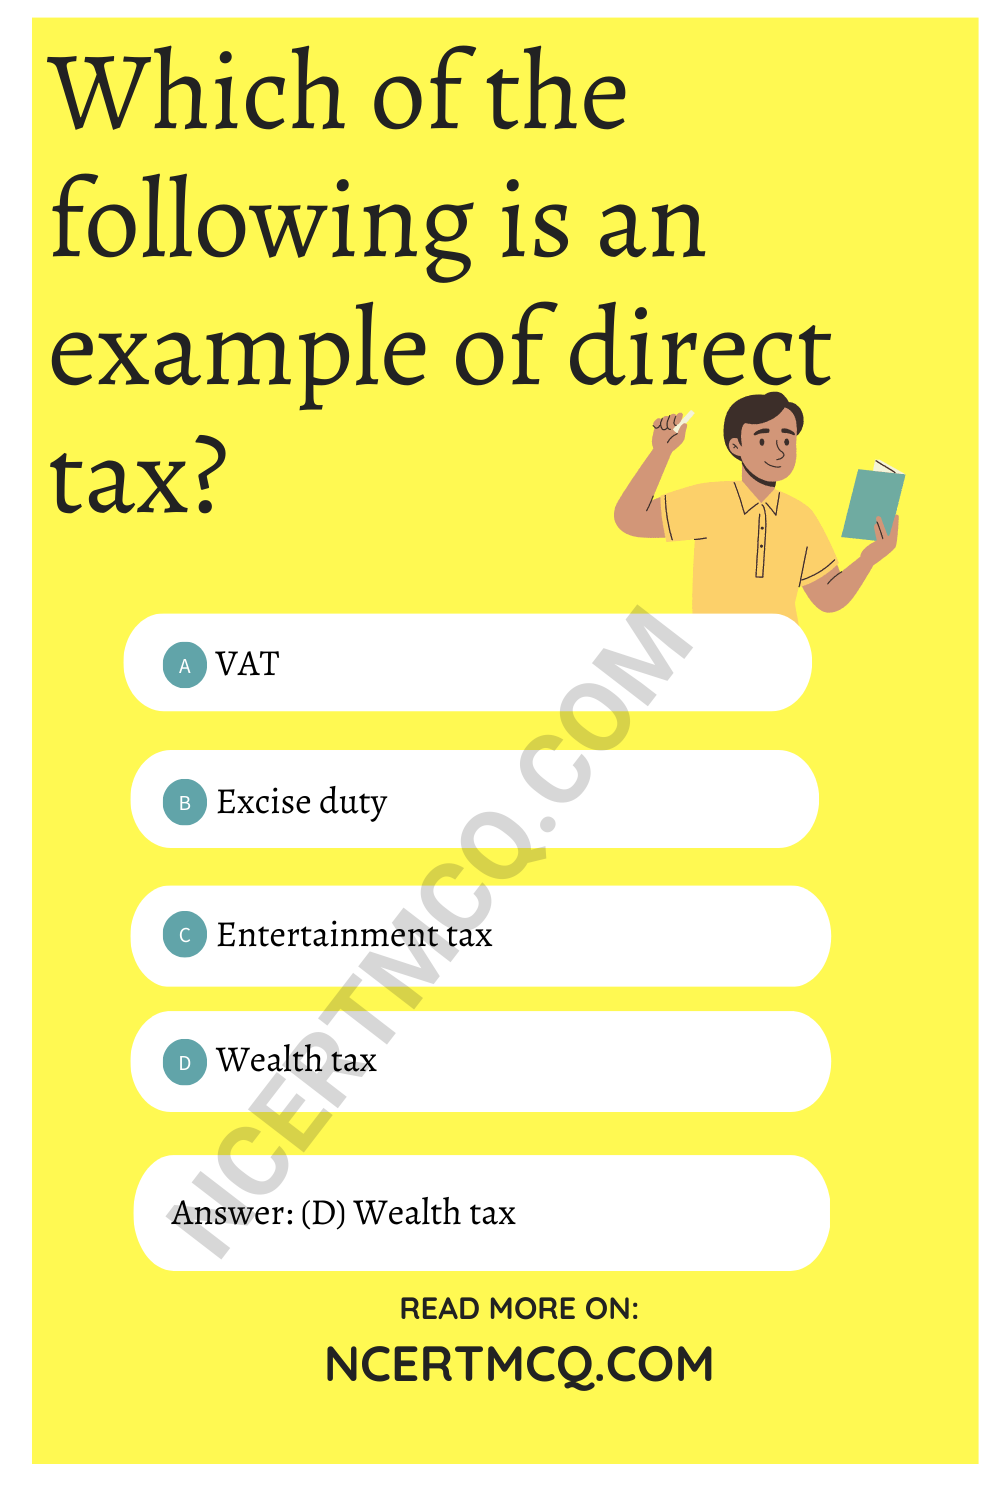 Which of the following is an example of direct tax?